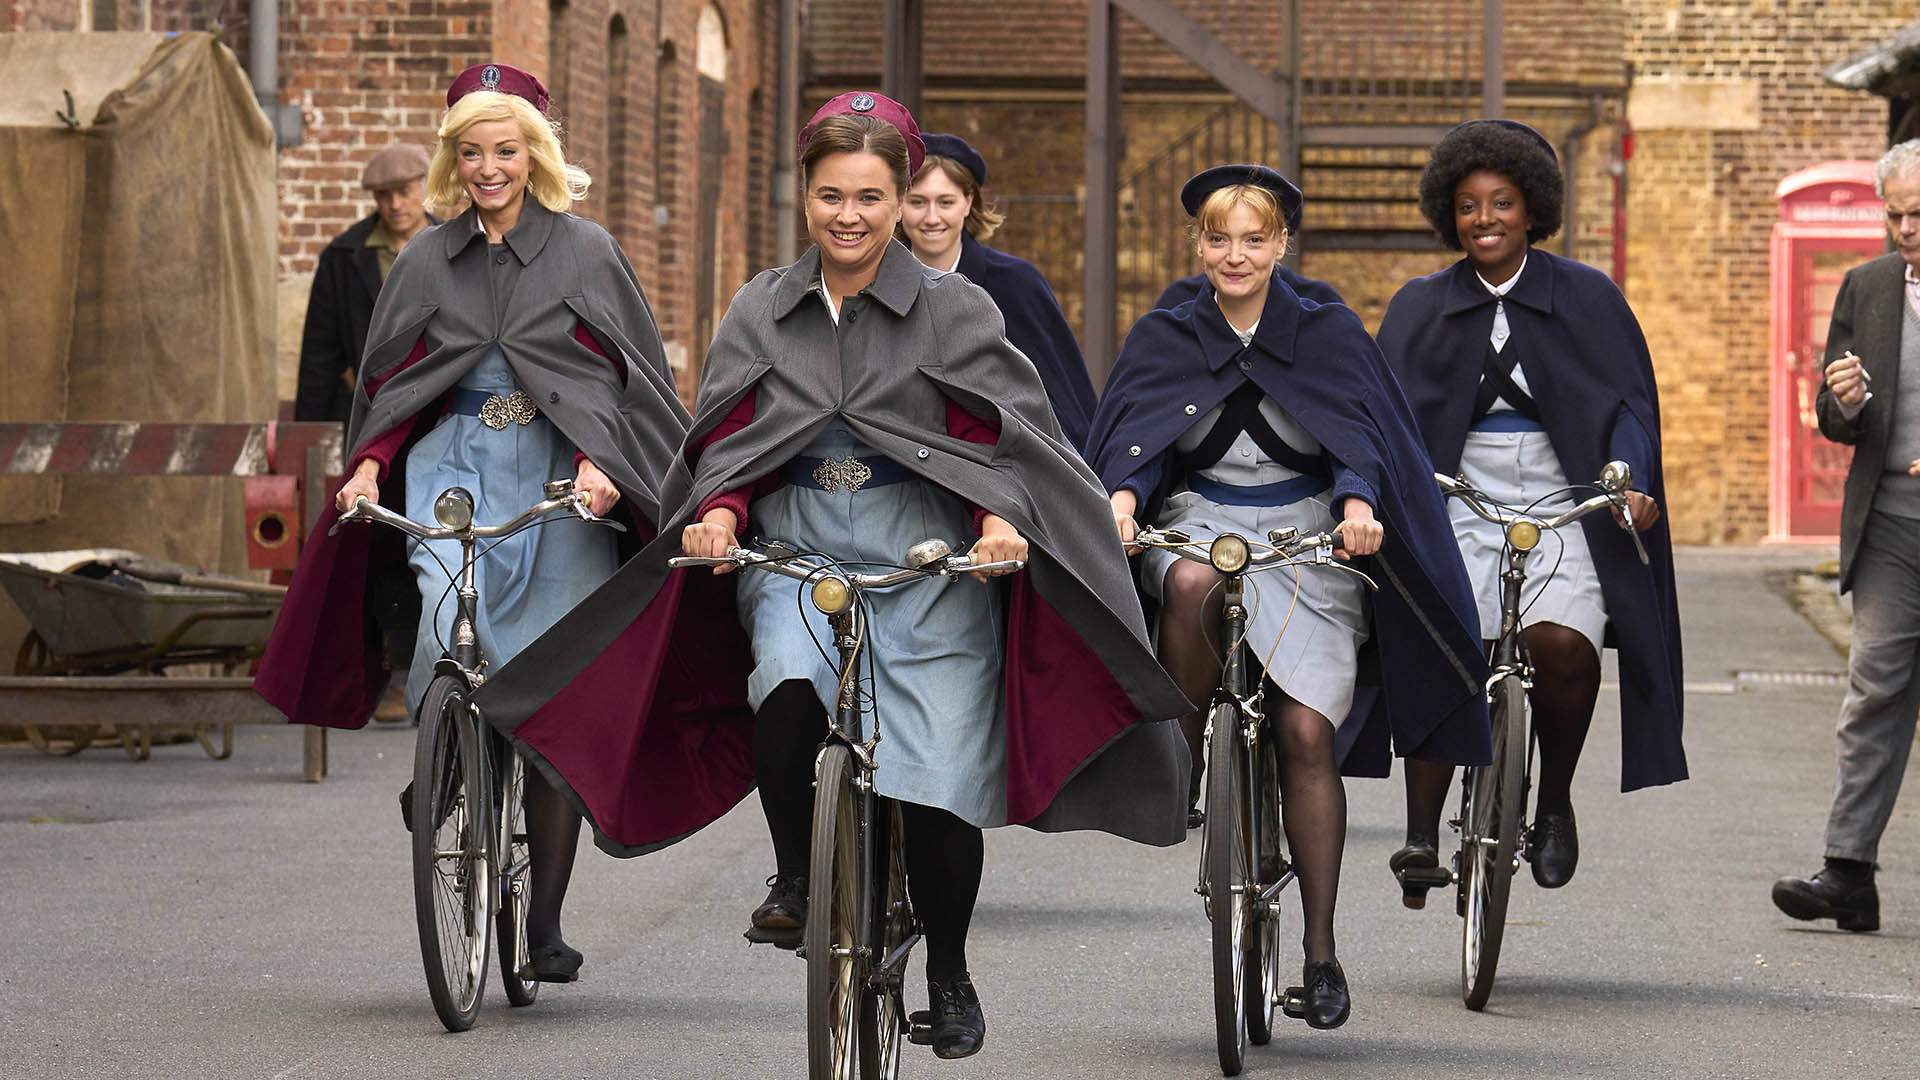 Five women dressed in blue nurse dresses, black tights, red caps and gray shawls ride bicycles in a group.